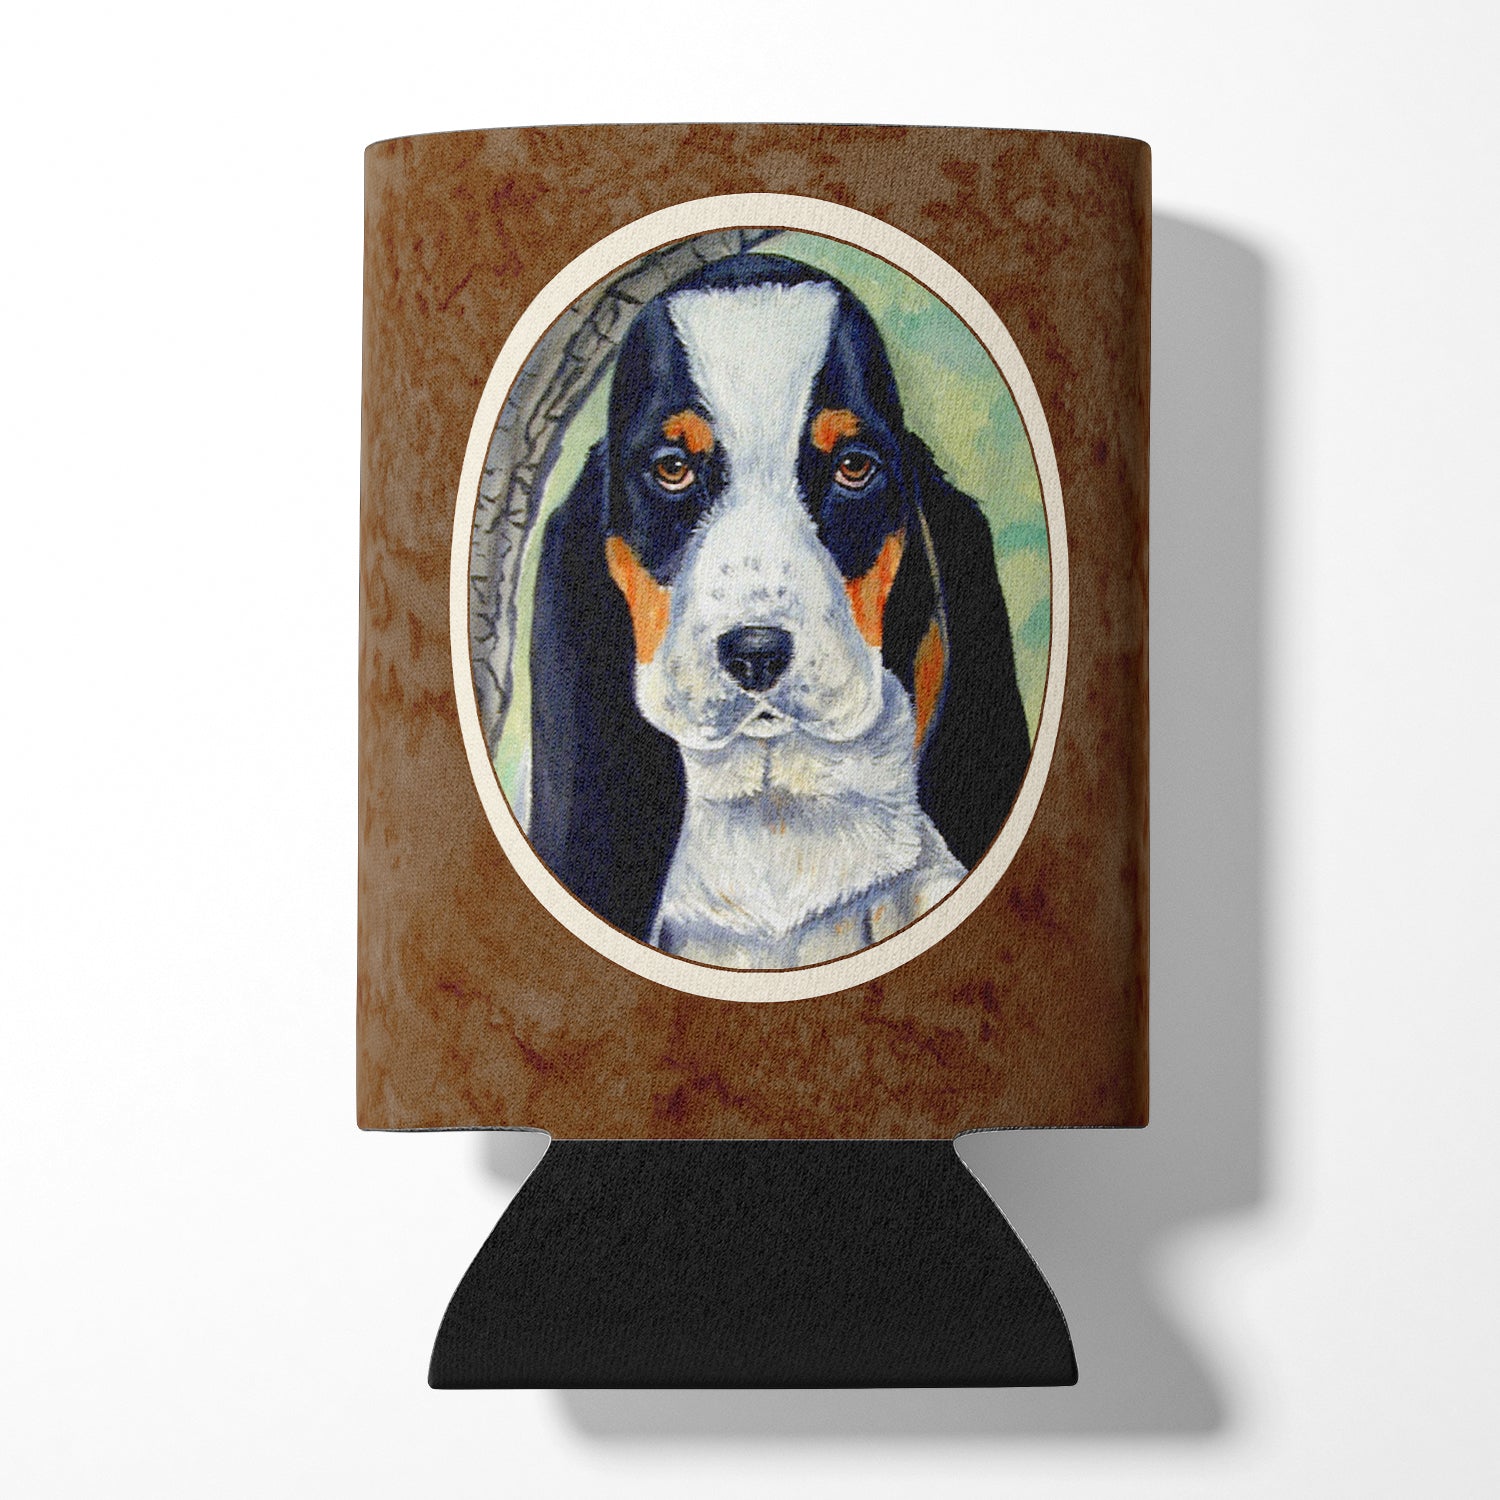 Basset Hound on the branch Can or Bottle Hugger 7002CC